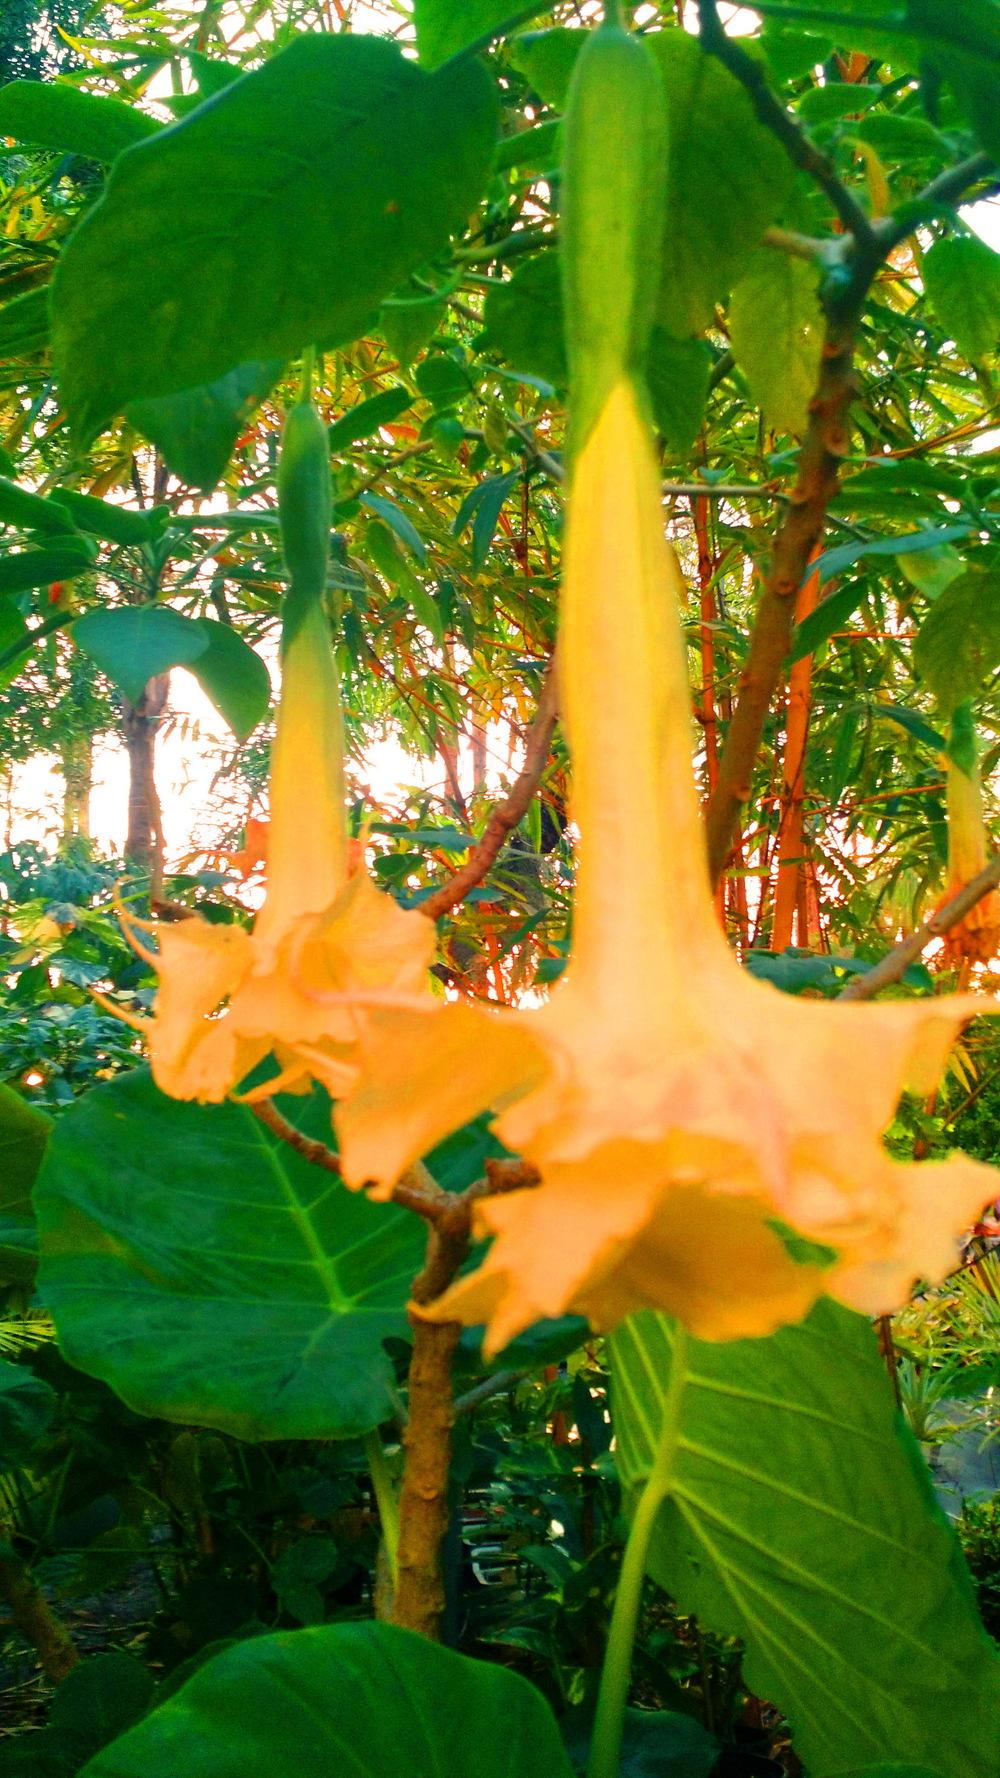 Photo of Angel Trumpet (Brugmansia 'Goldflame') uploaded by payton1